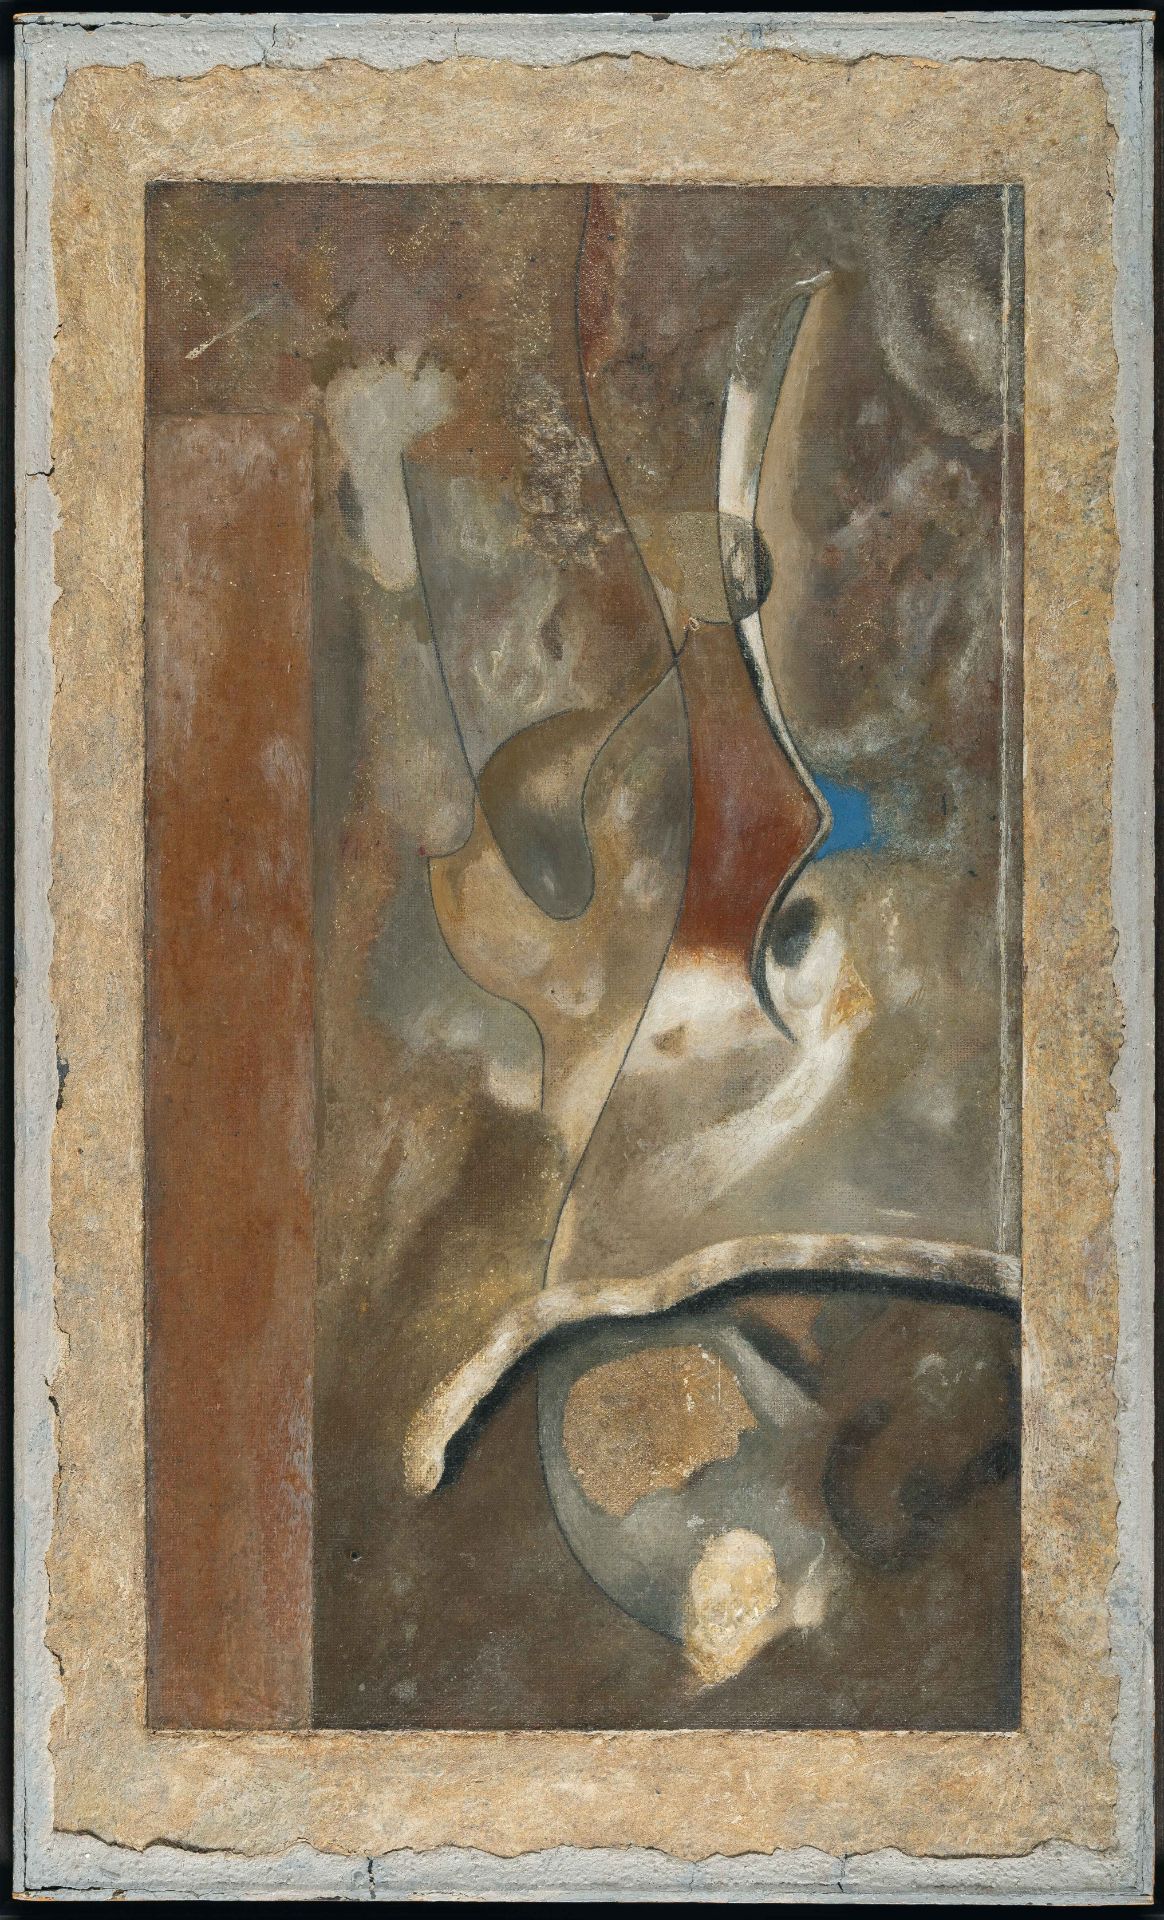 Carl Buchheister (1890 - Hannover - 1964) – “Komposition Ind“ (Composition Ind).Mixed media on - Image 2 of 4